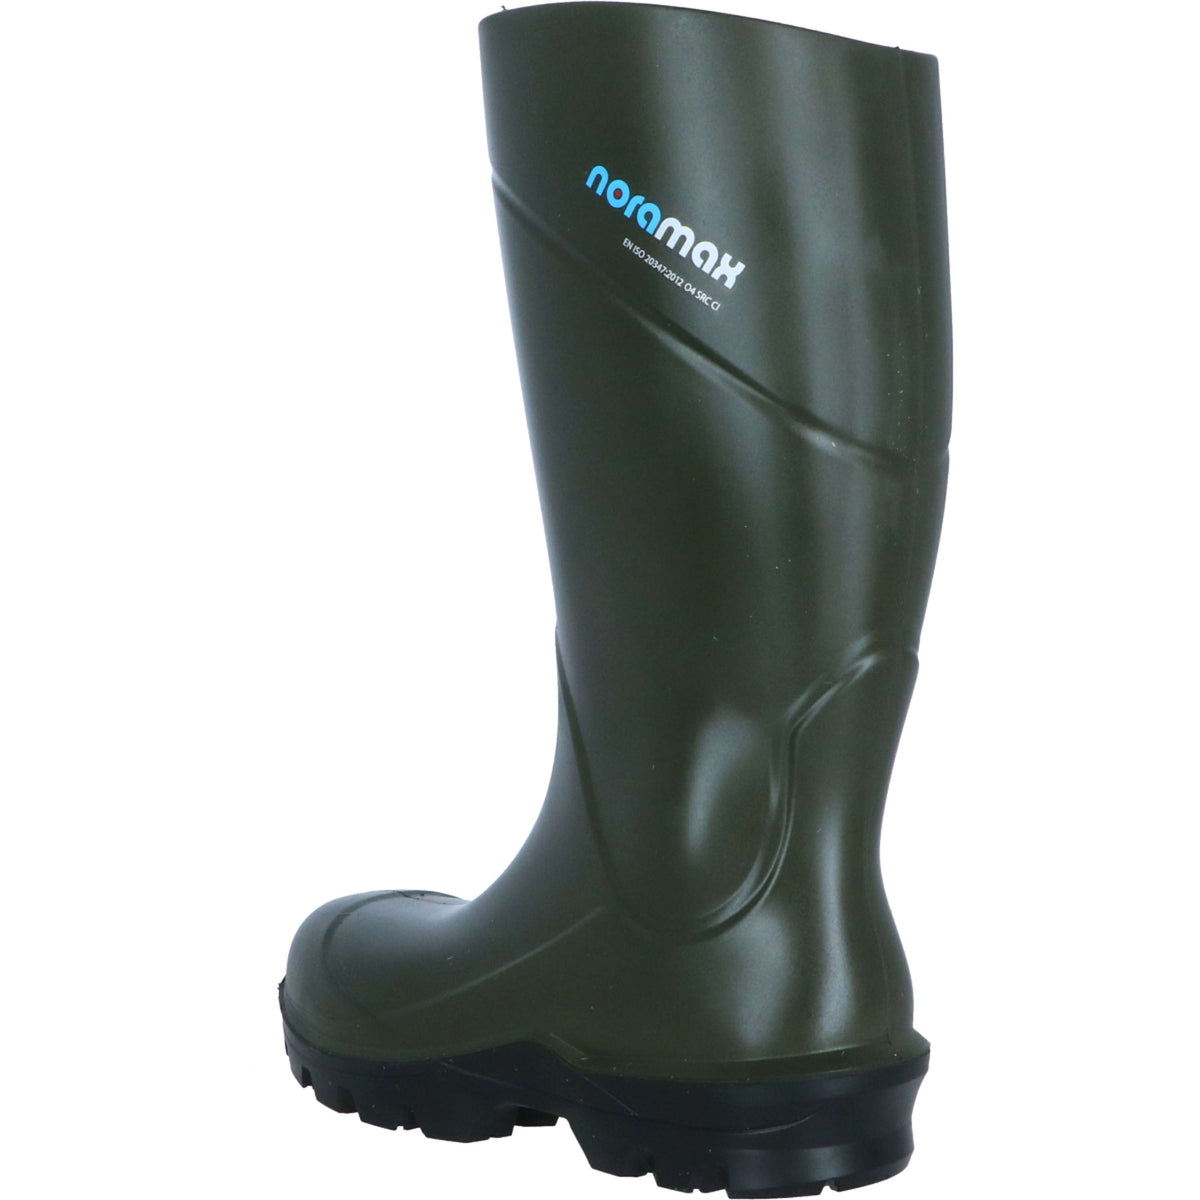 Kerbl Stiefel Noramax Non Safety